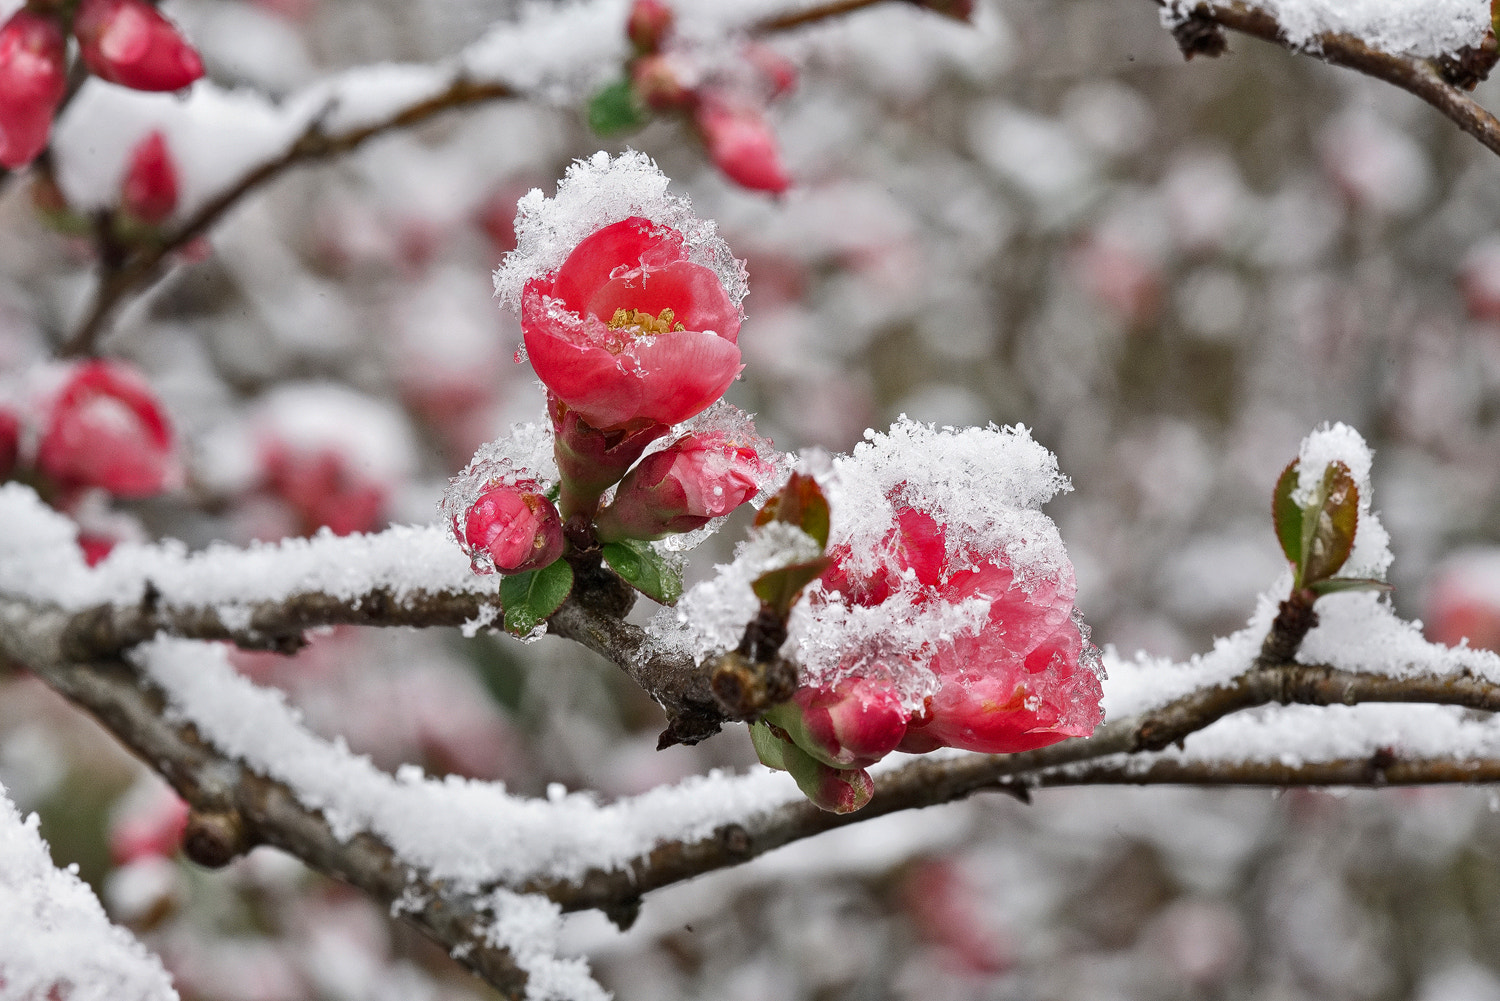 100mm F2.8 SSM sample photo. Fire bush and ice photography